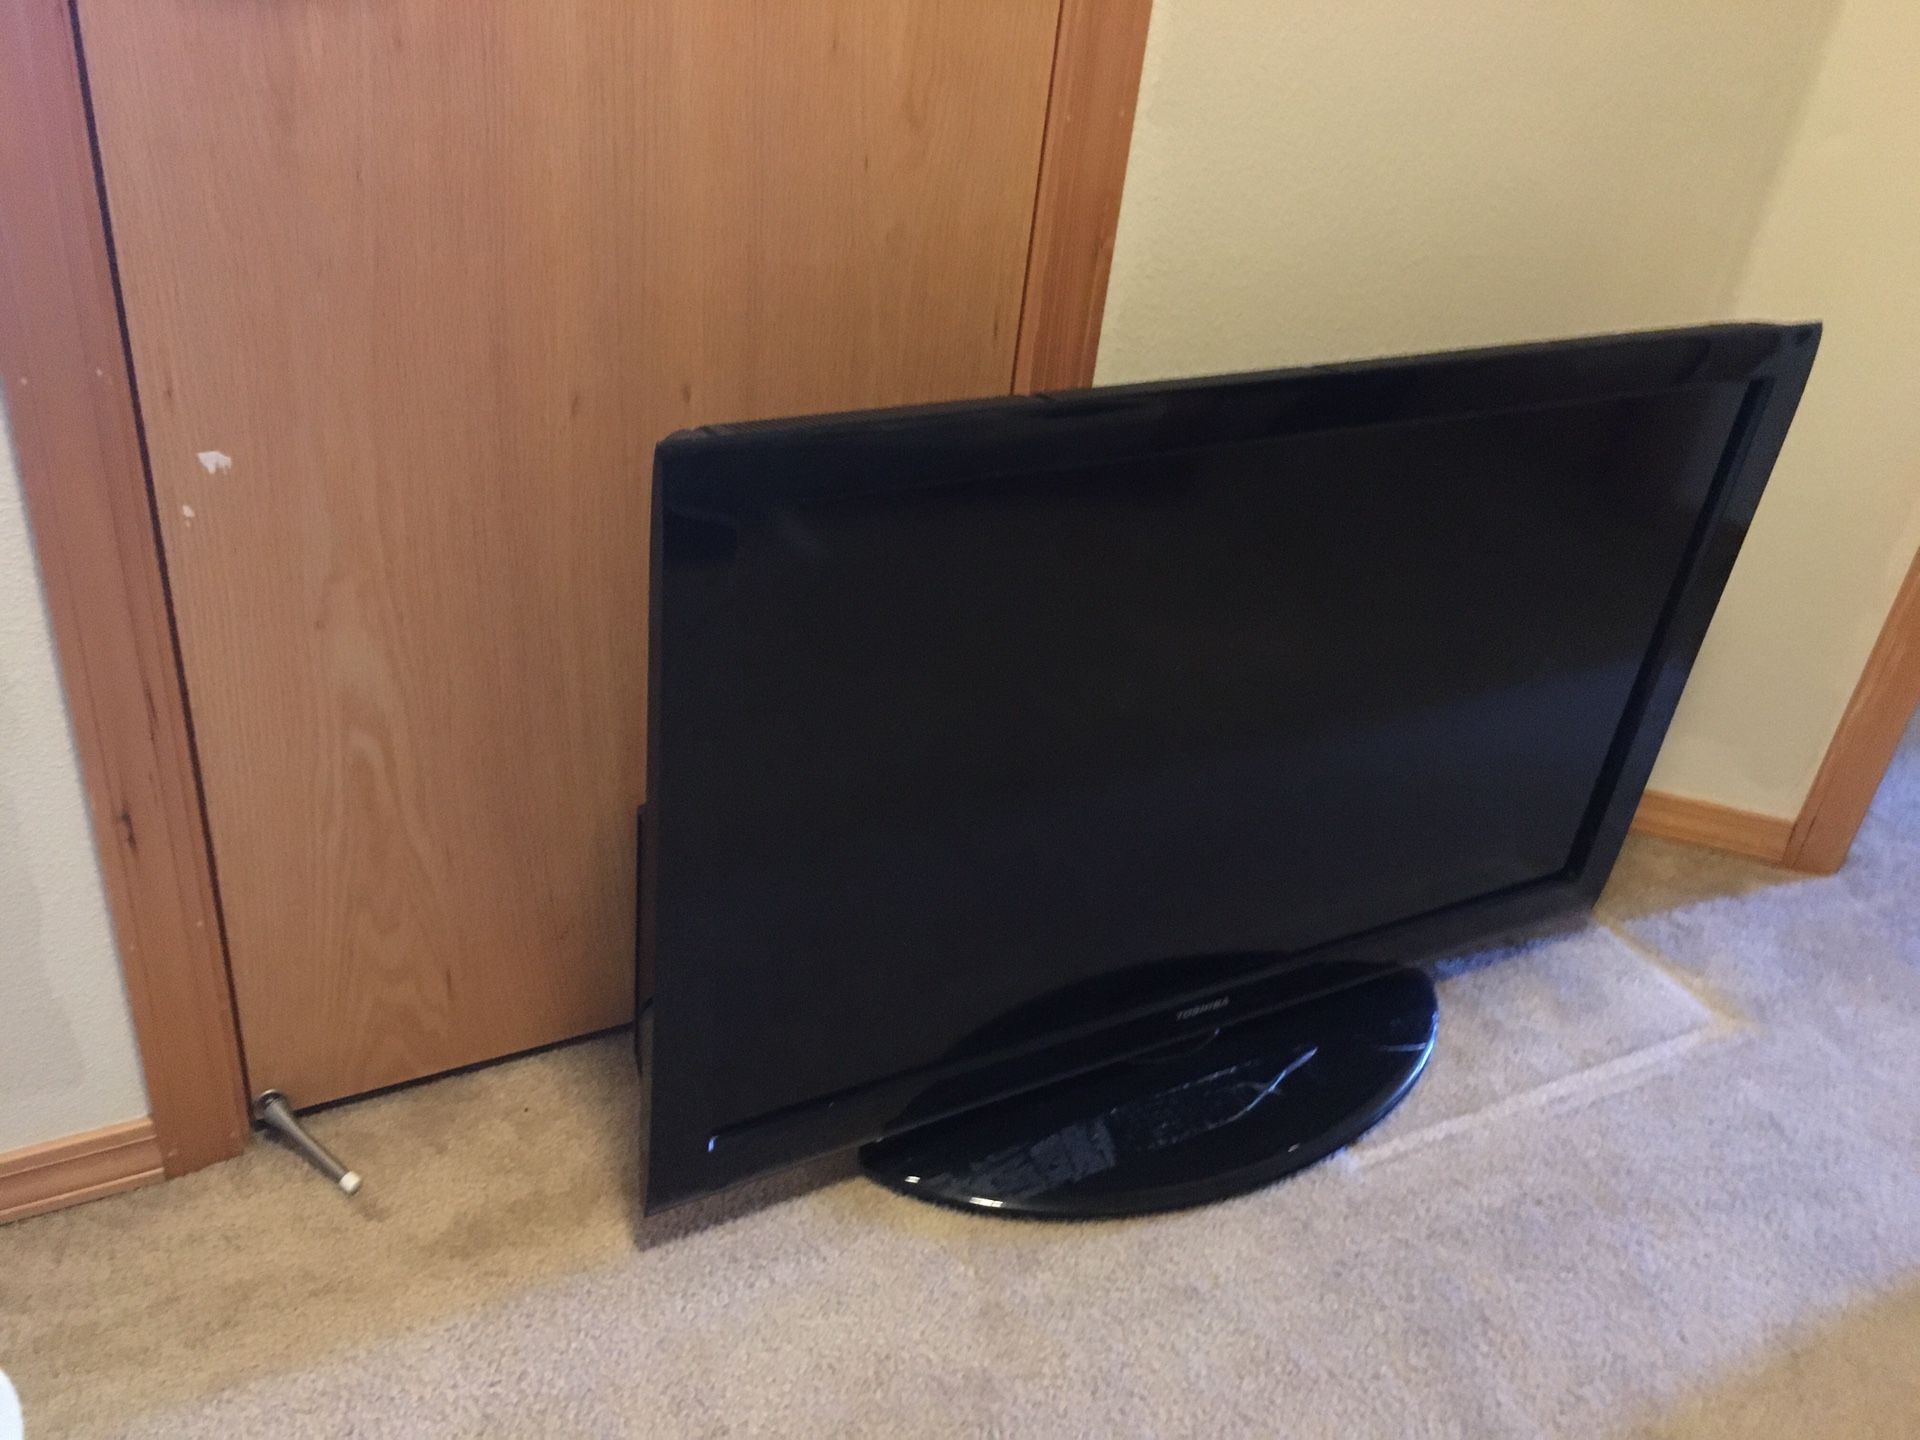 40” Toshiba TV with stand and wall mounted. Complete set and like new.